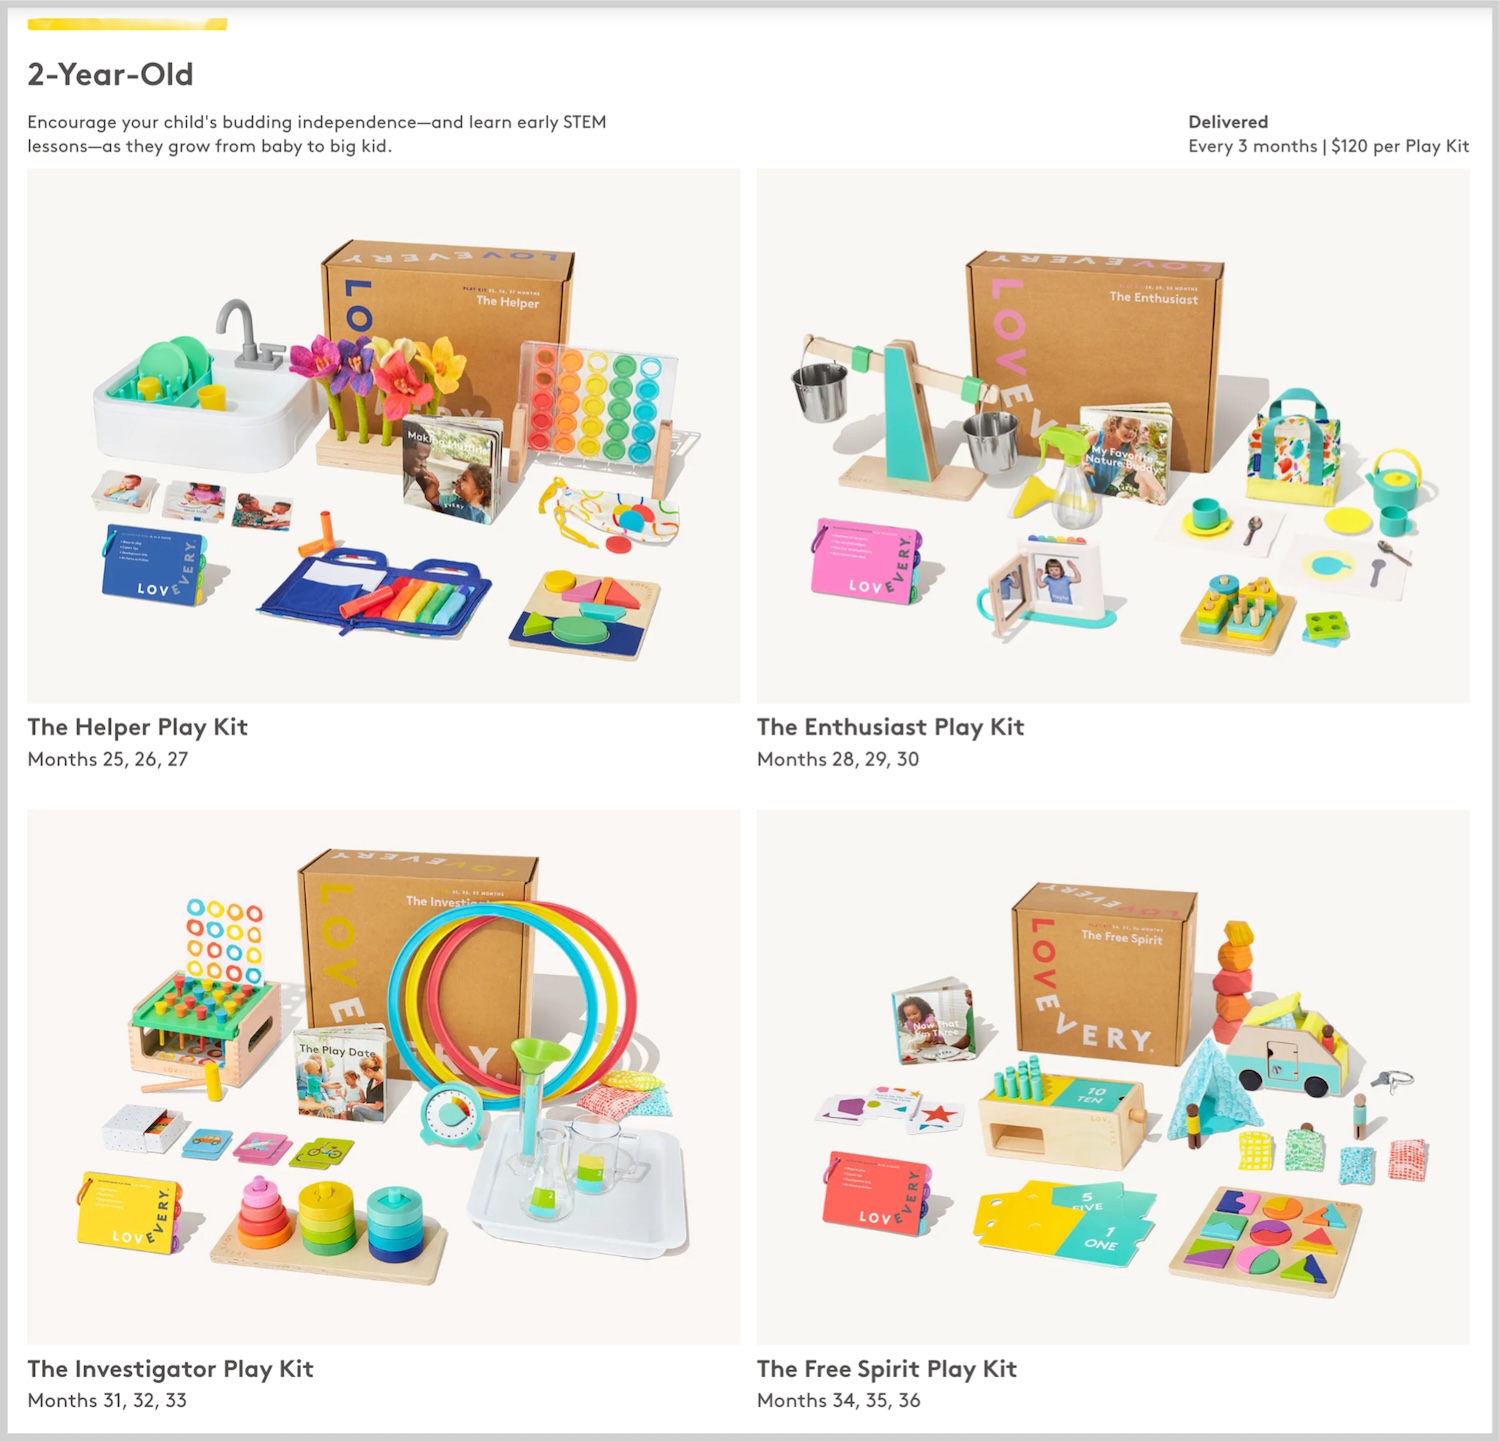 lovevery play kits reviews for 2 year olds